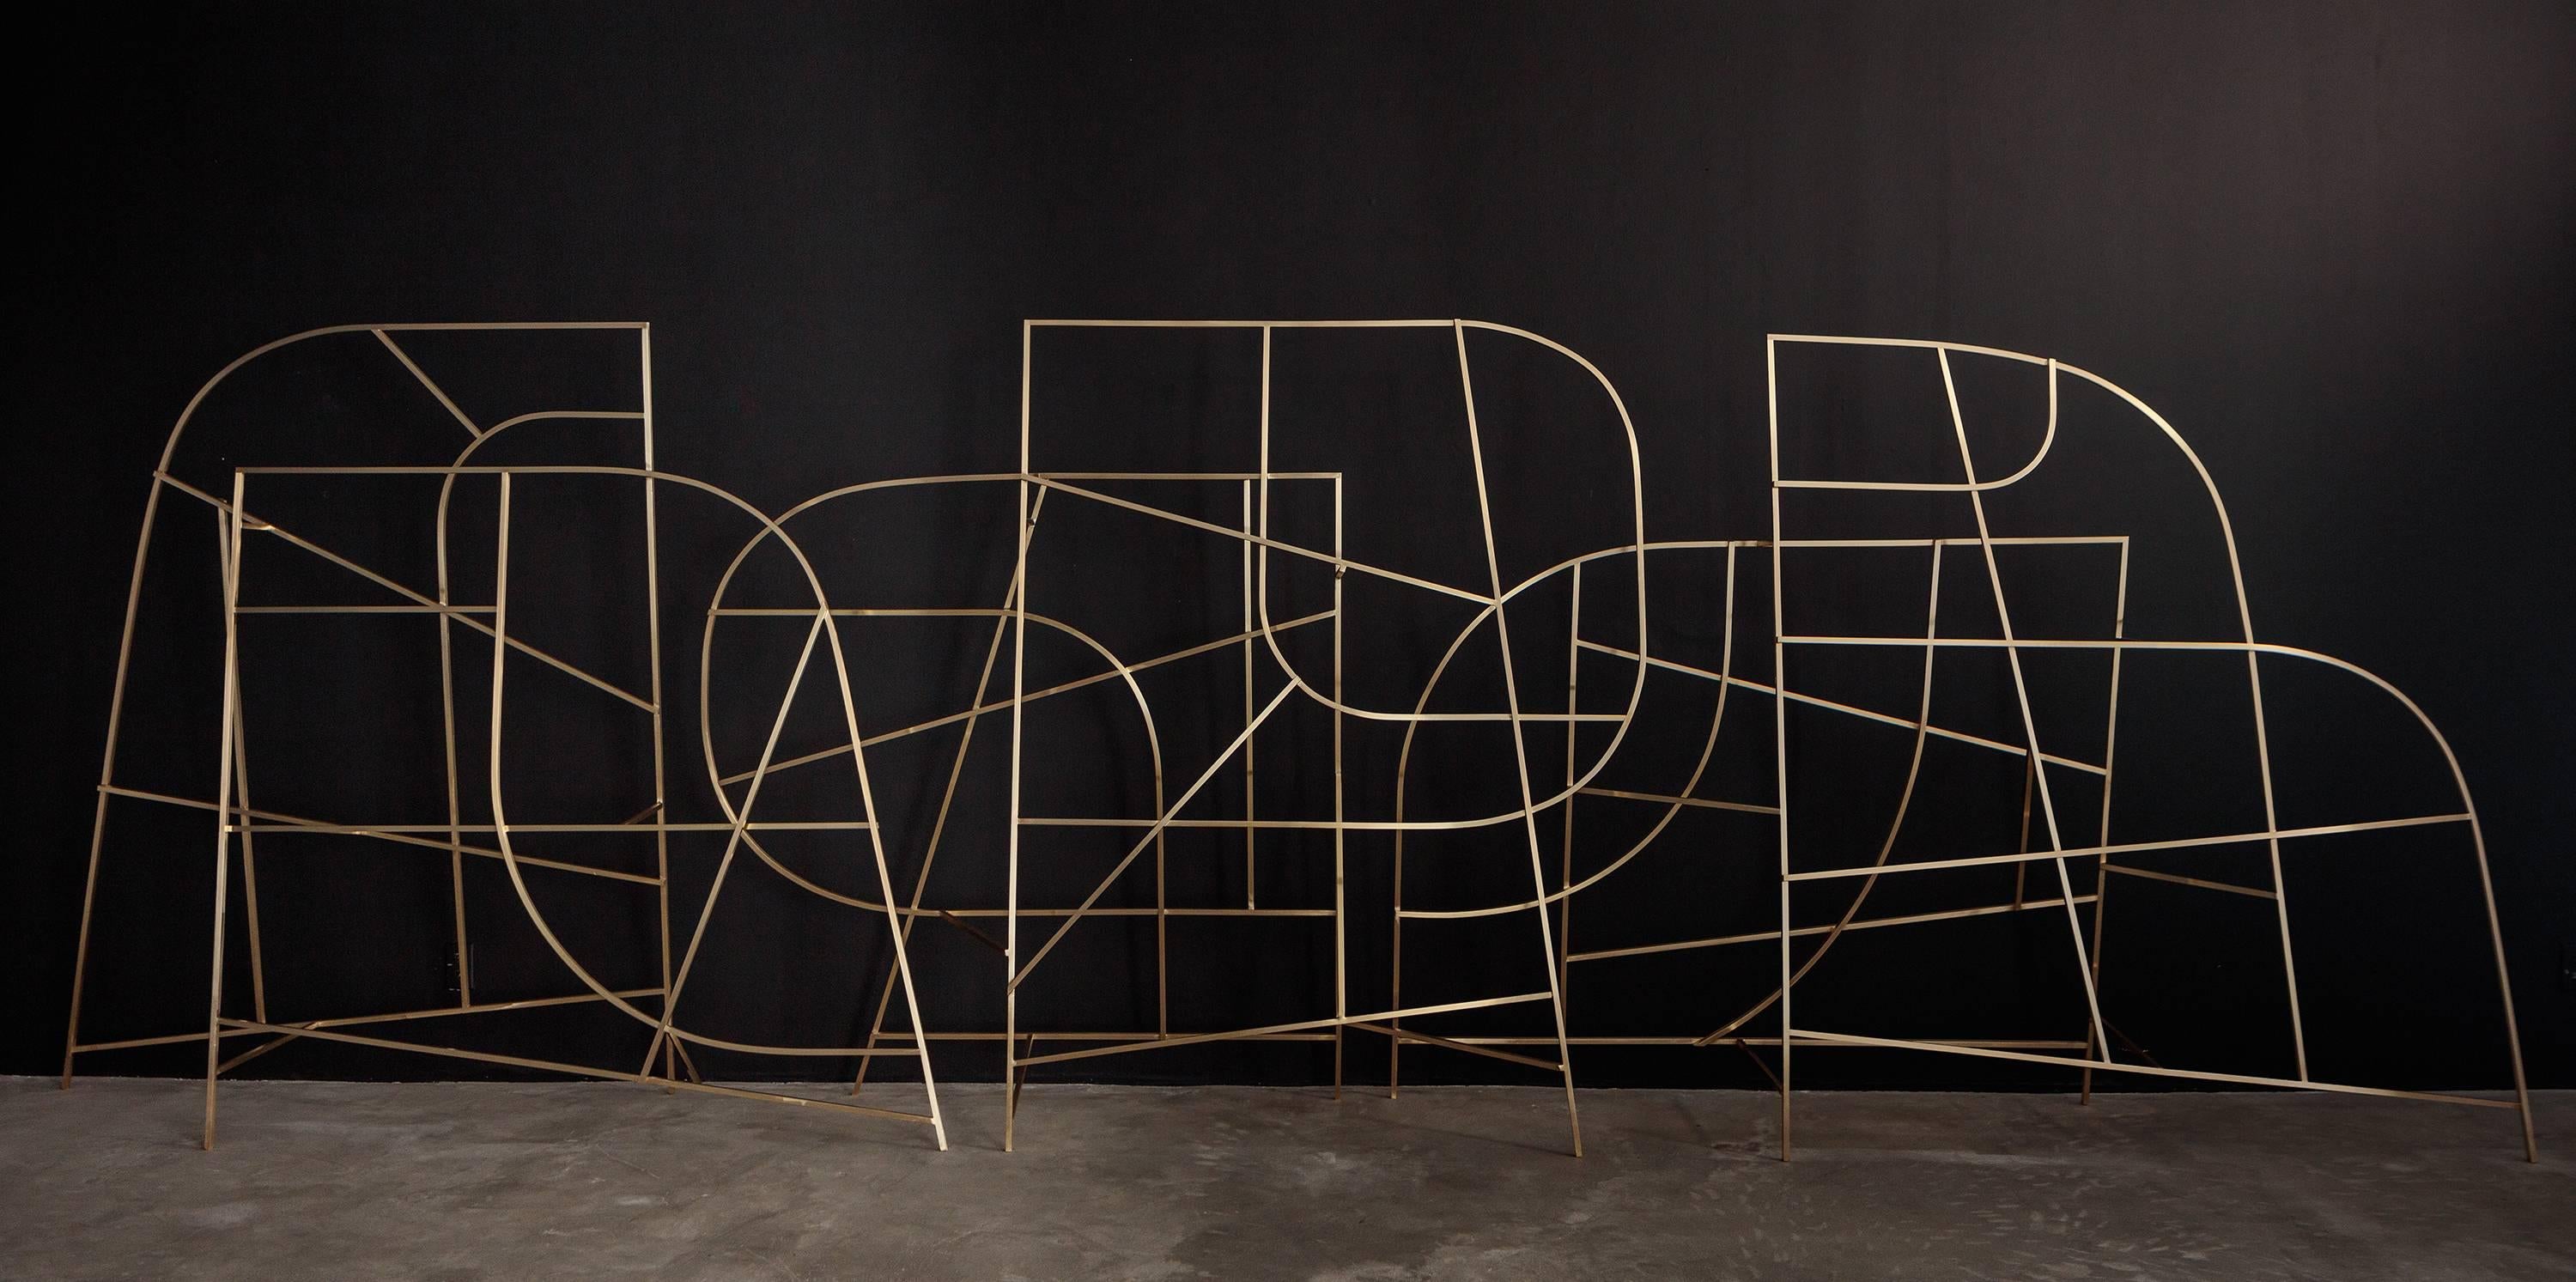 Division 01, 2014
Solid brass
69